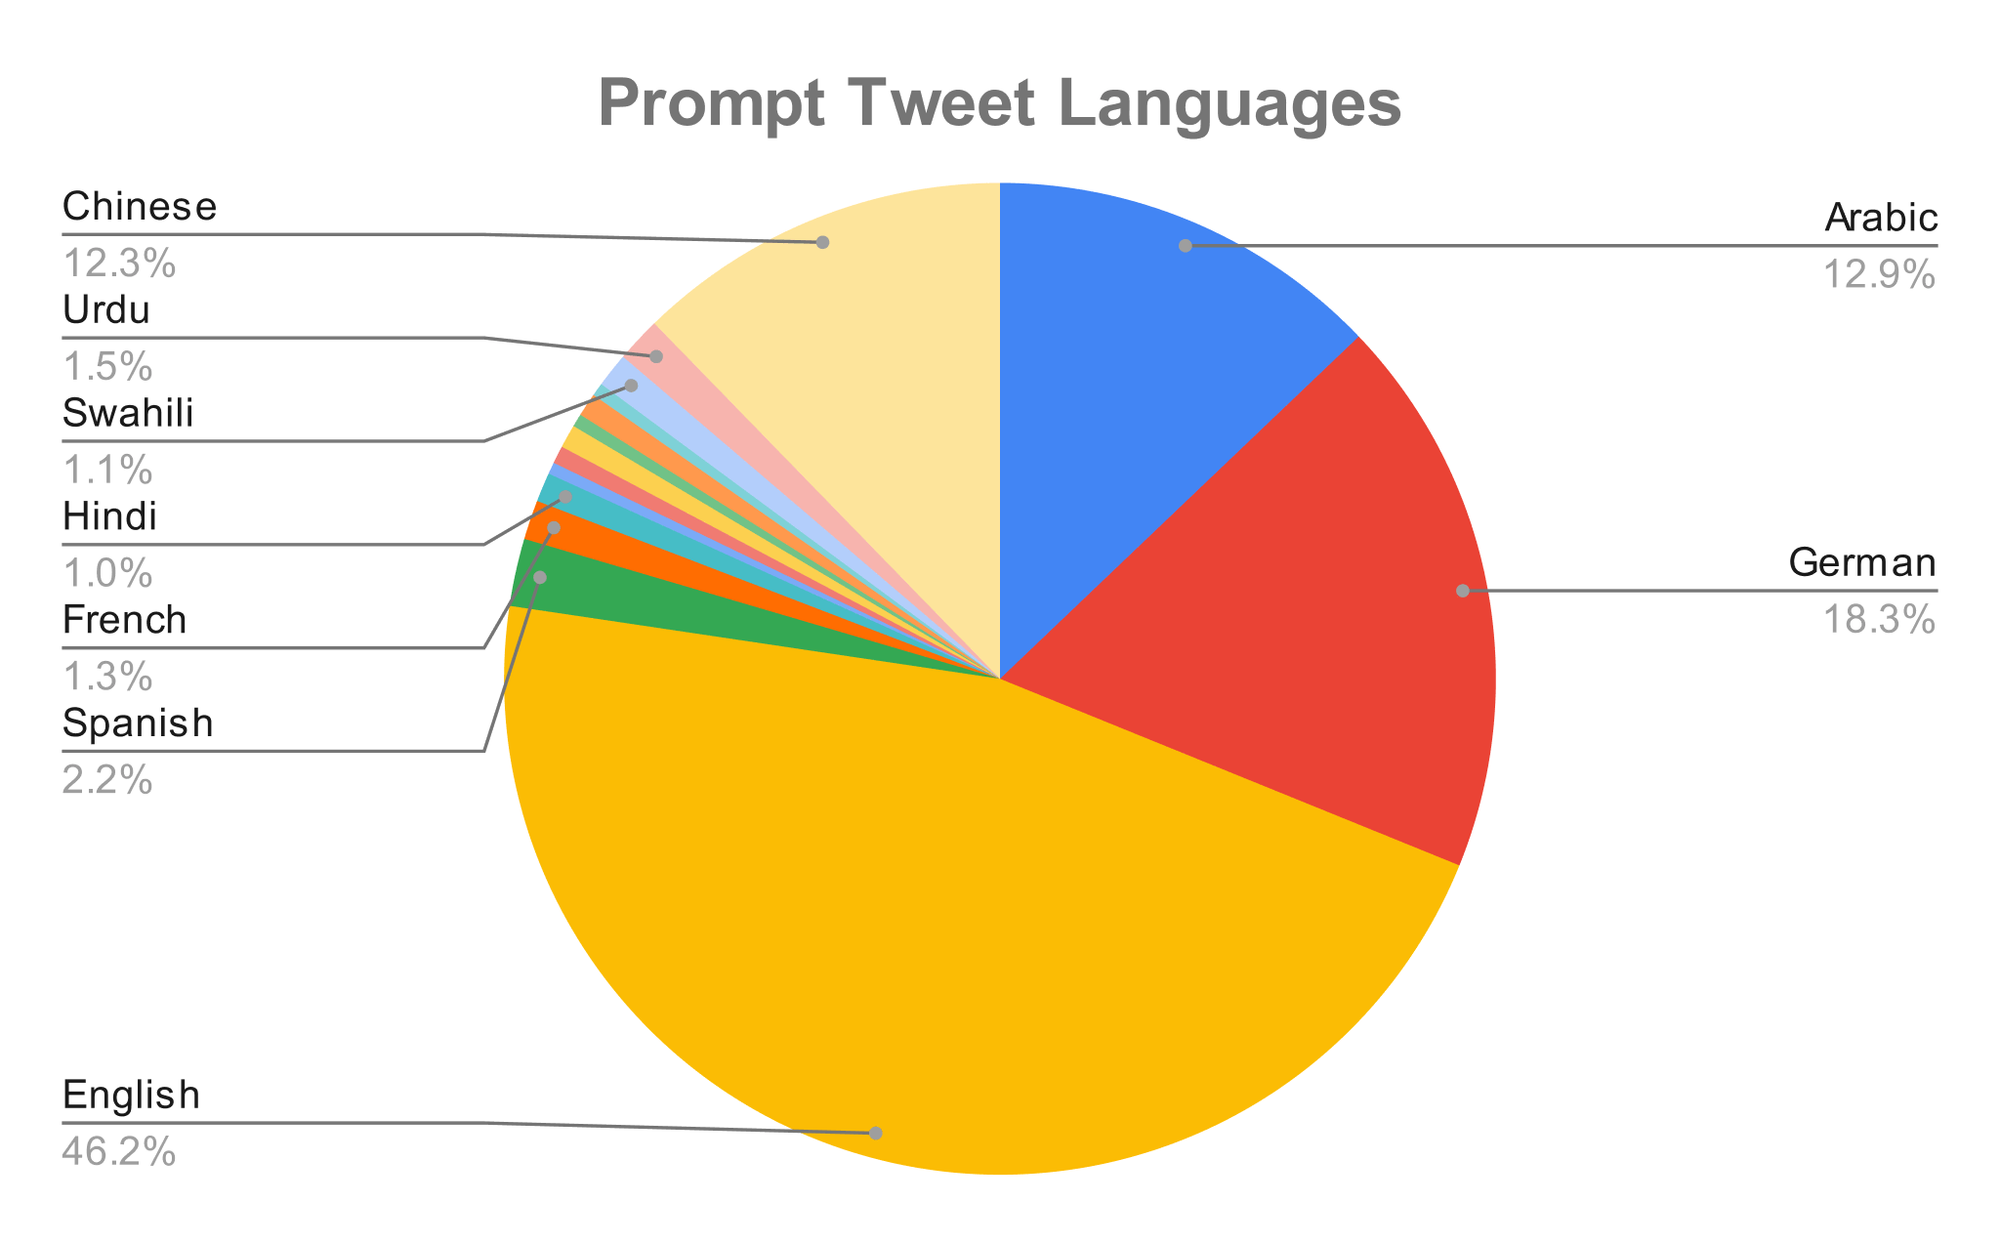 Language detection was performed using this Hugging Face text classification model. This pie chart shows the breakdown of different languages used by prompt tweets mentioning @ChatGPTBot on twitter.